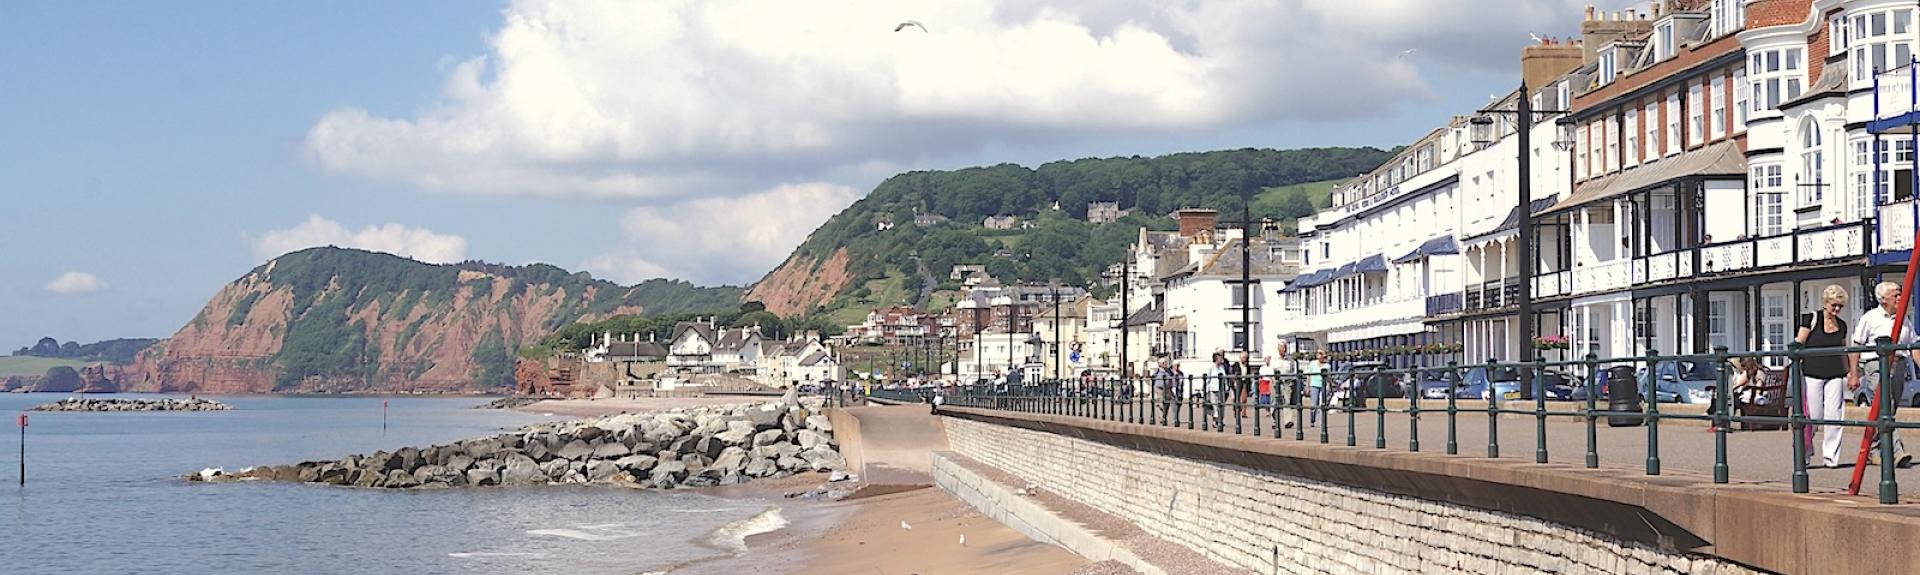 An esplanade lined by cafes and hotels overlooks a shingle beach in East Devon.